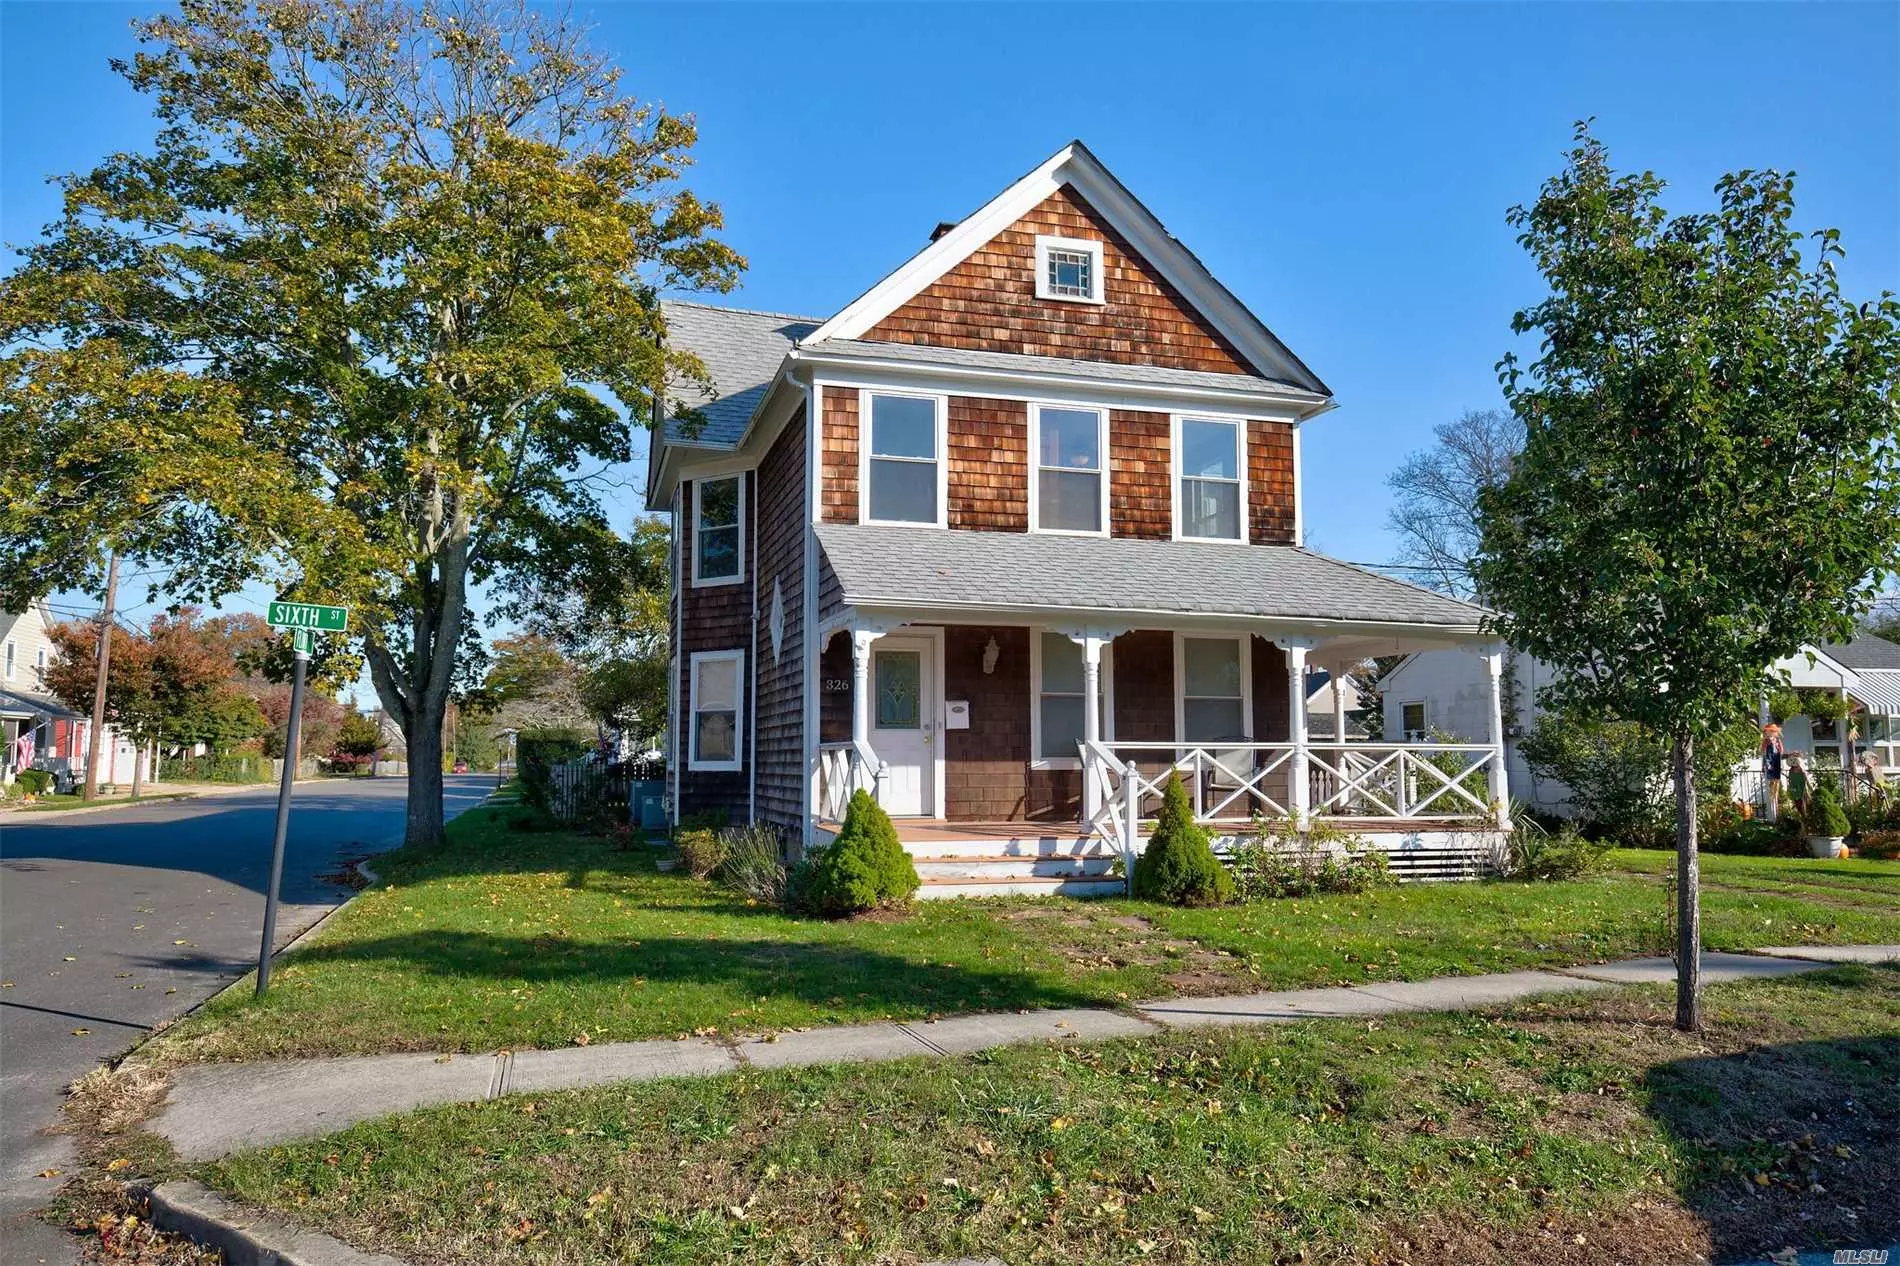 Two Family Farmhouse In The Heart Of Greenport Village.